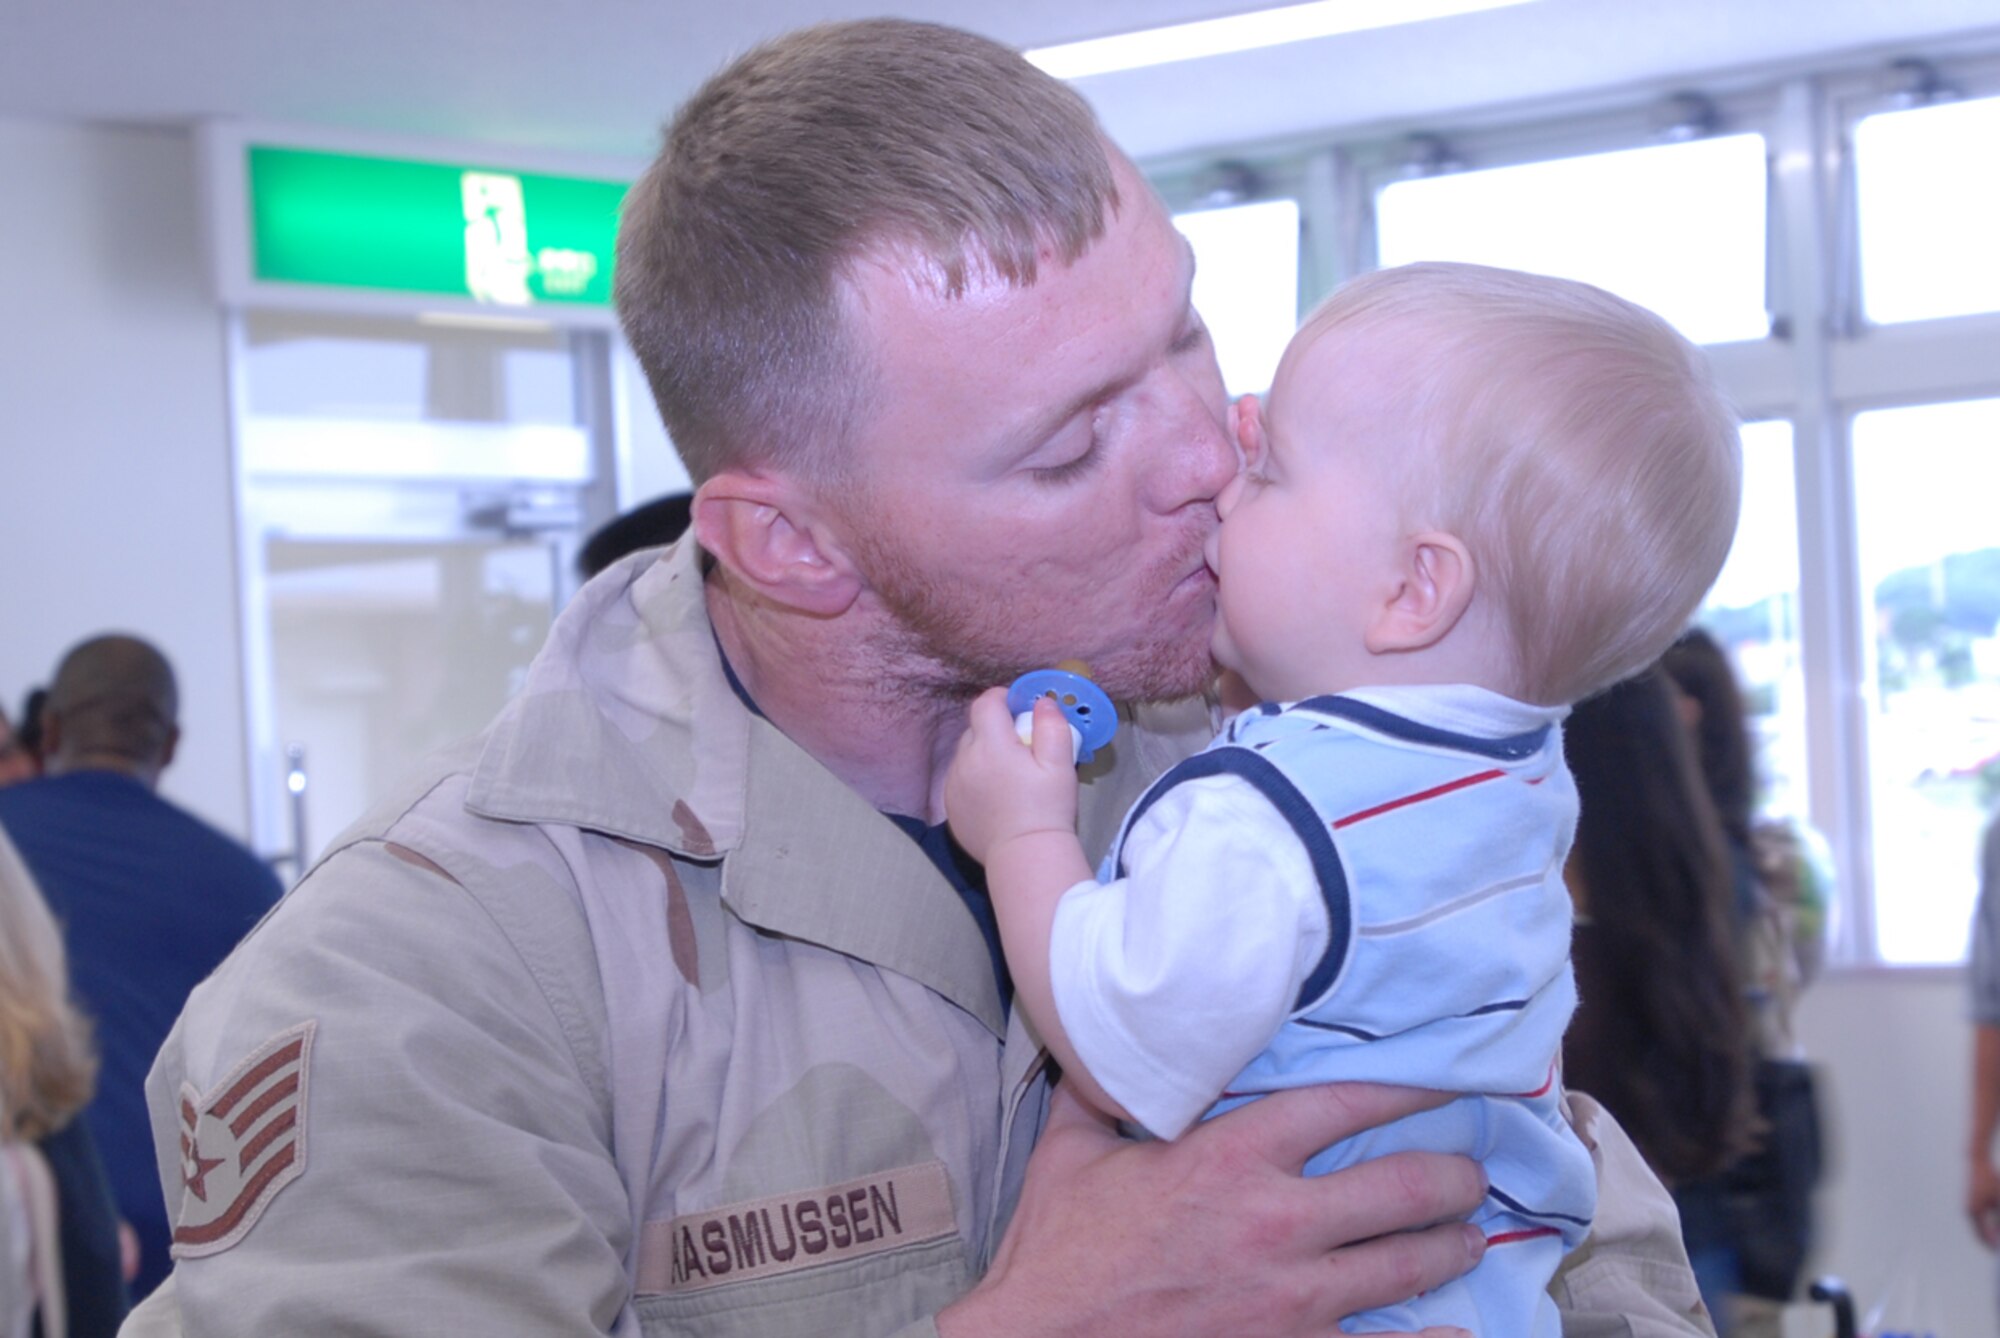 Staff Sgt. A.J. Rasmussen, 18th Civil Engineer Squadron, kisses his 10 month-old son, Calvin, May 19 upon his return to Kadena Air Base, Japan, following a four-month deployment to Balad Air Base, Iraq. More than 120 Team Kadena members returned from deployment that day.
(U.S. Air Force/Master Sgt. Jeff Loftin)